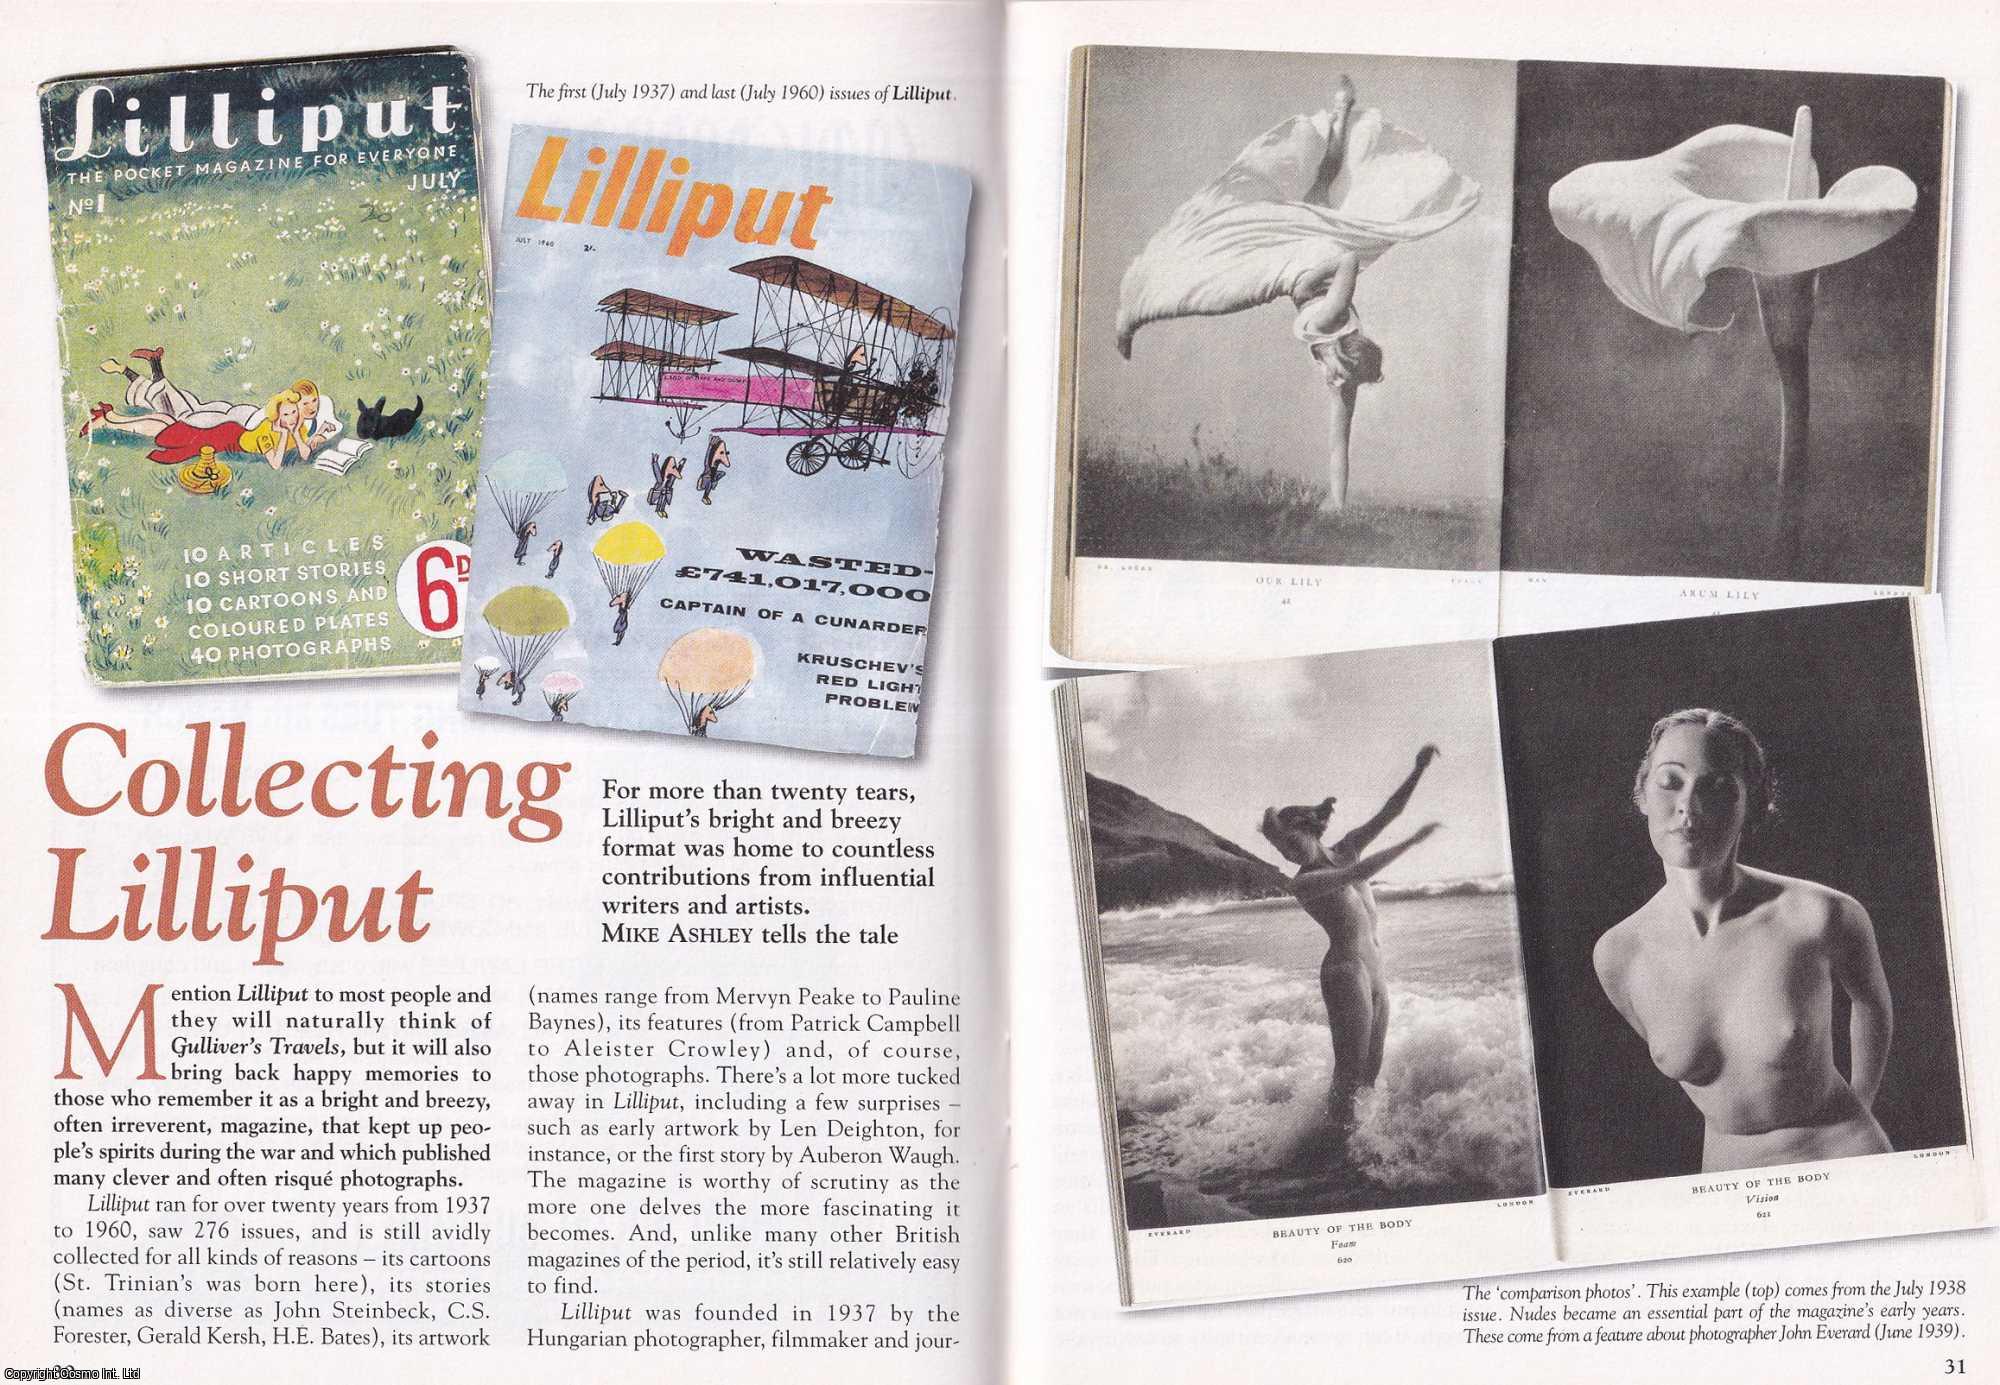 Mike Ashley - Collecting Lilliput. Telling The Tale of The Bright and Breezy Format. This is an original article separated from an issue of The Book & Magazine Collector publication.